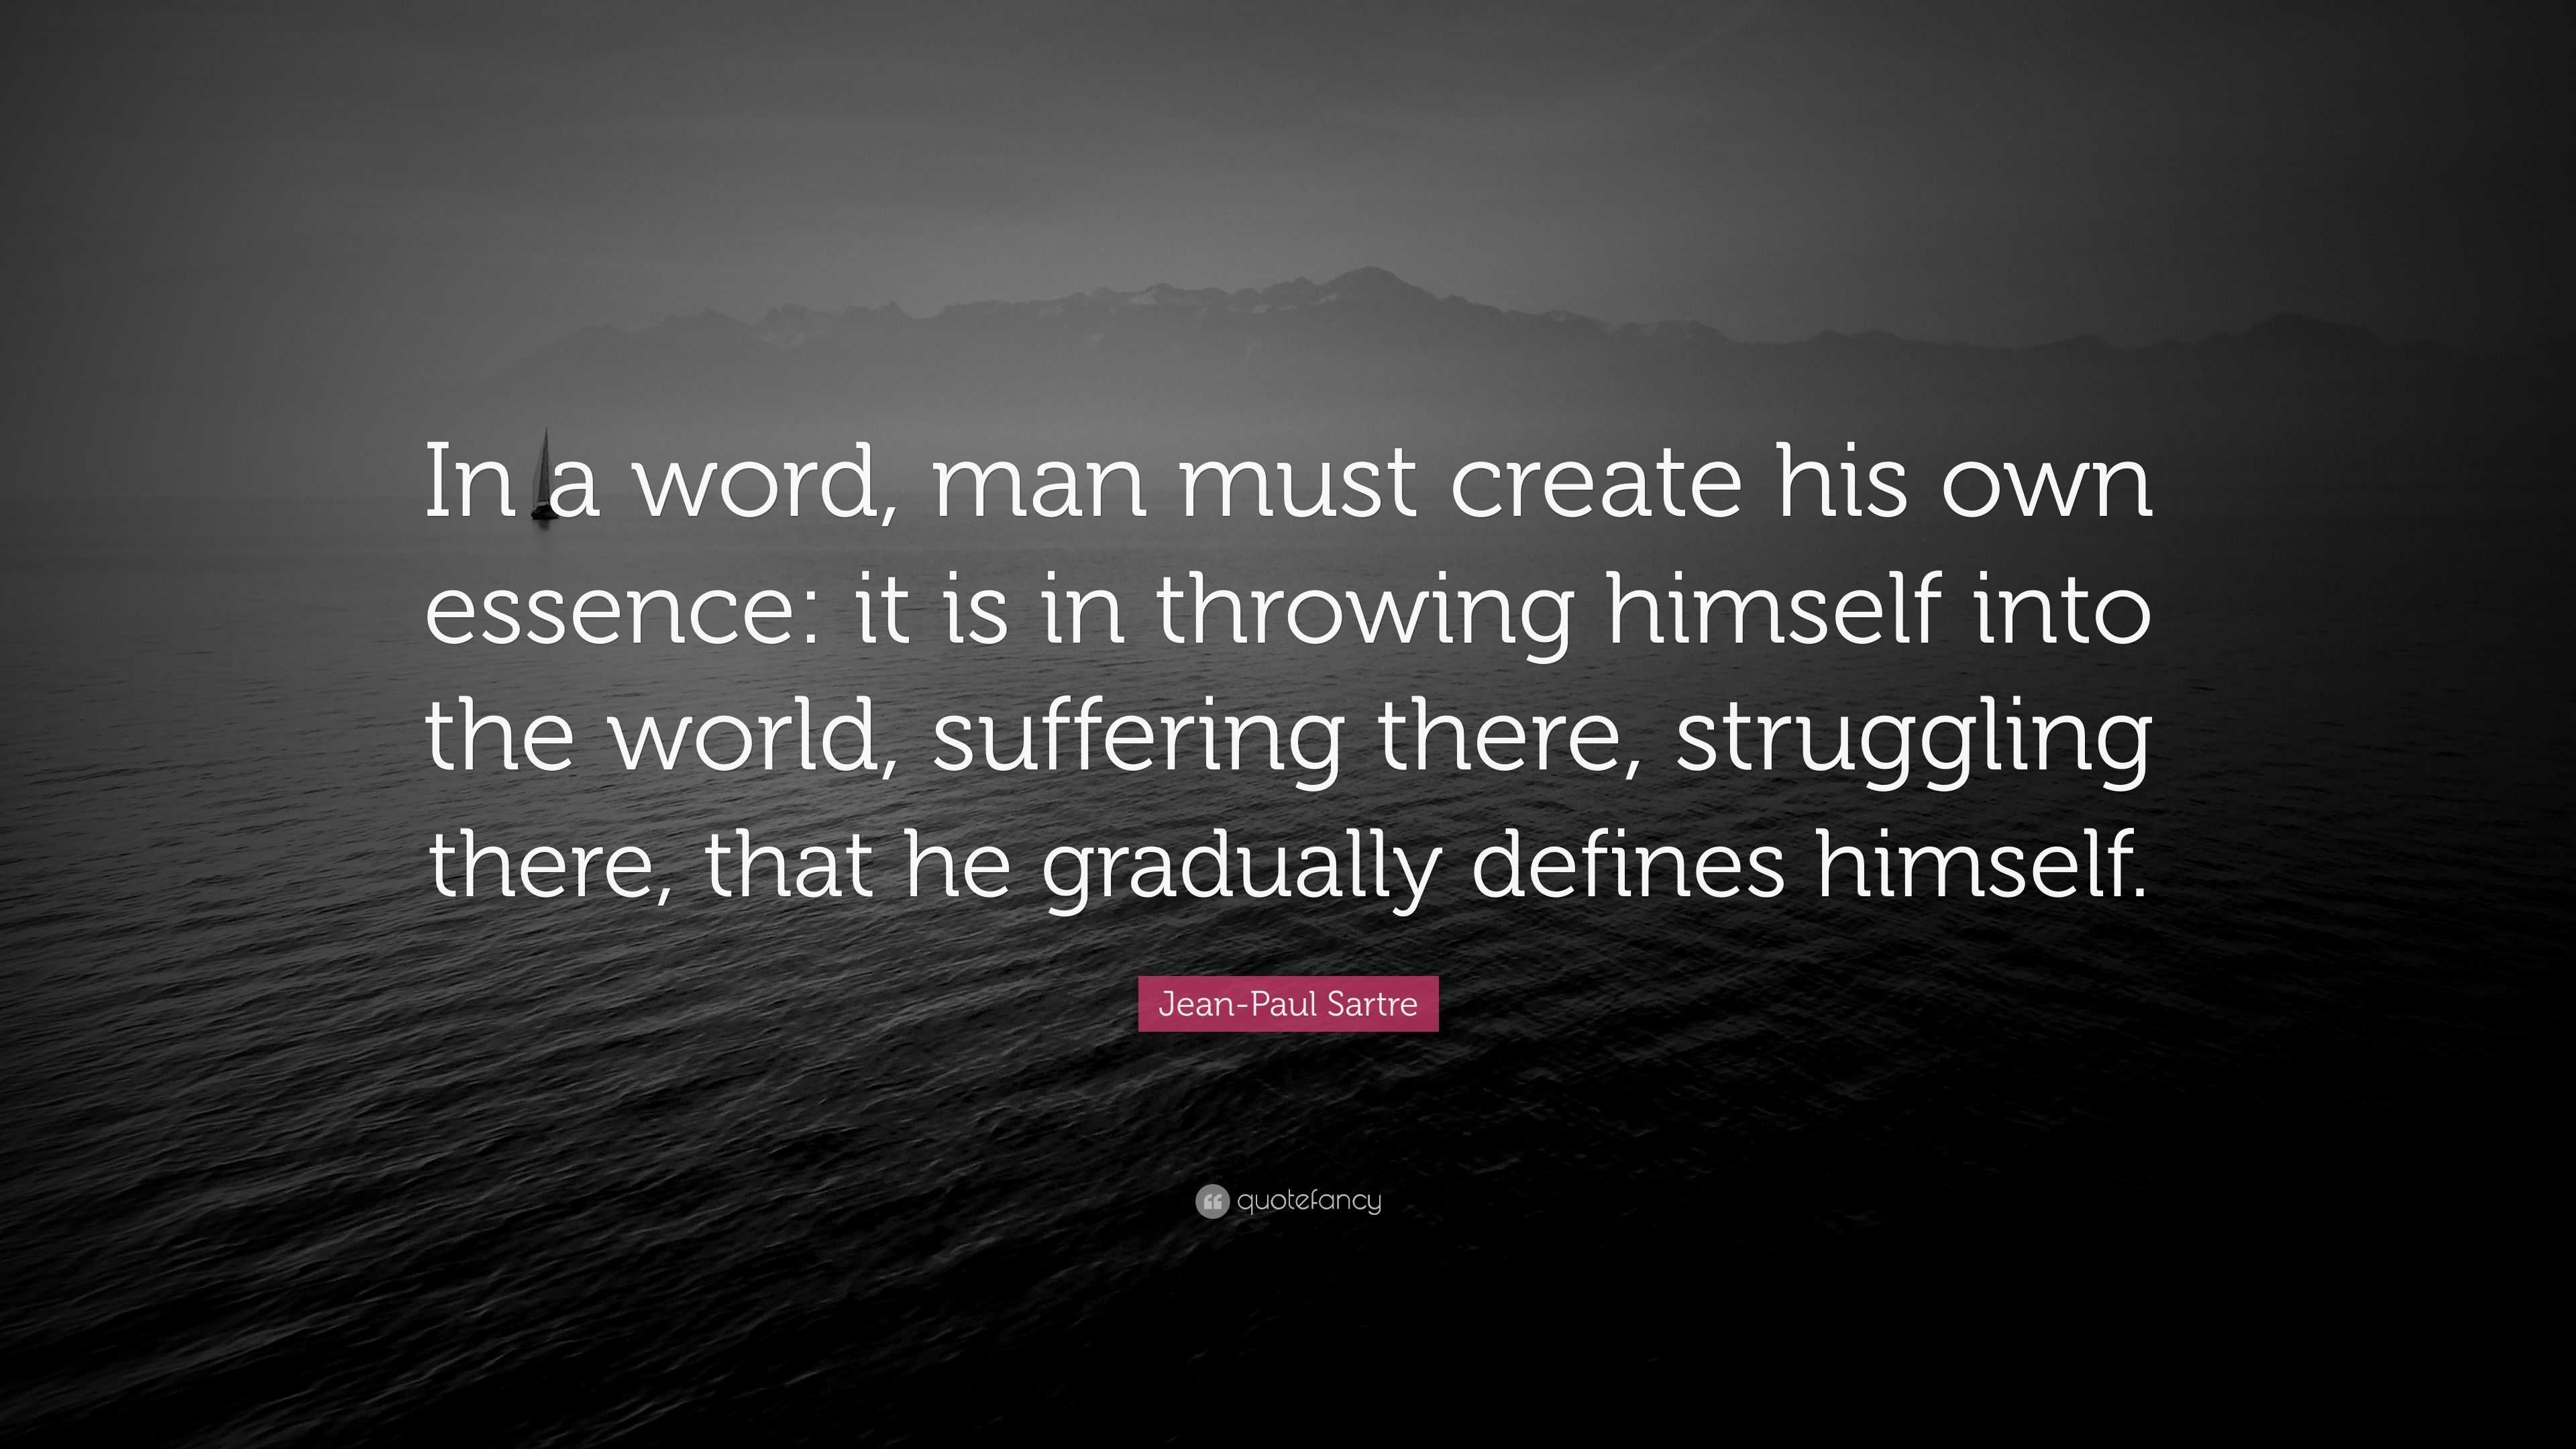 Jean-Paul Sartre Quote: “In a word, man must create his own essence: it ...